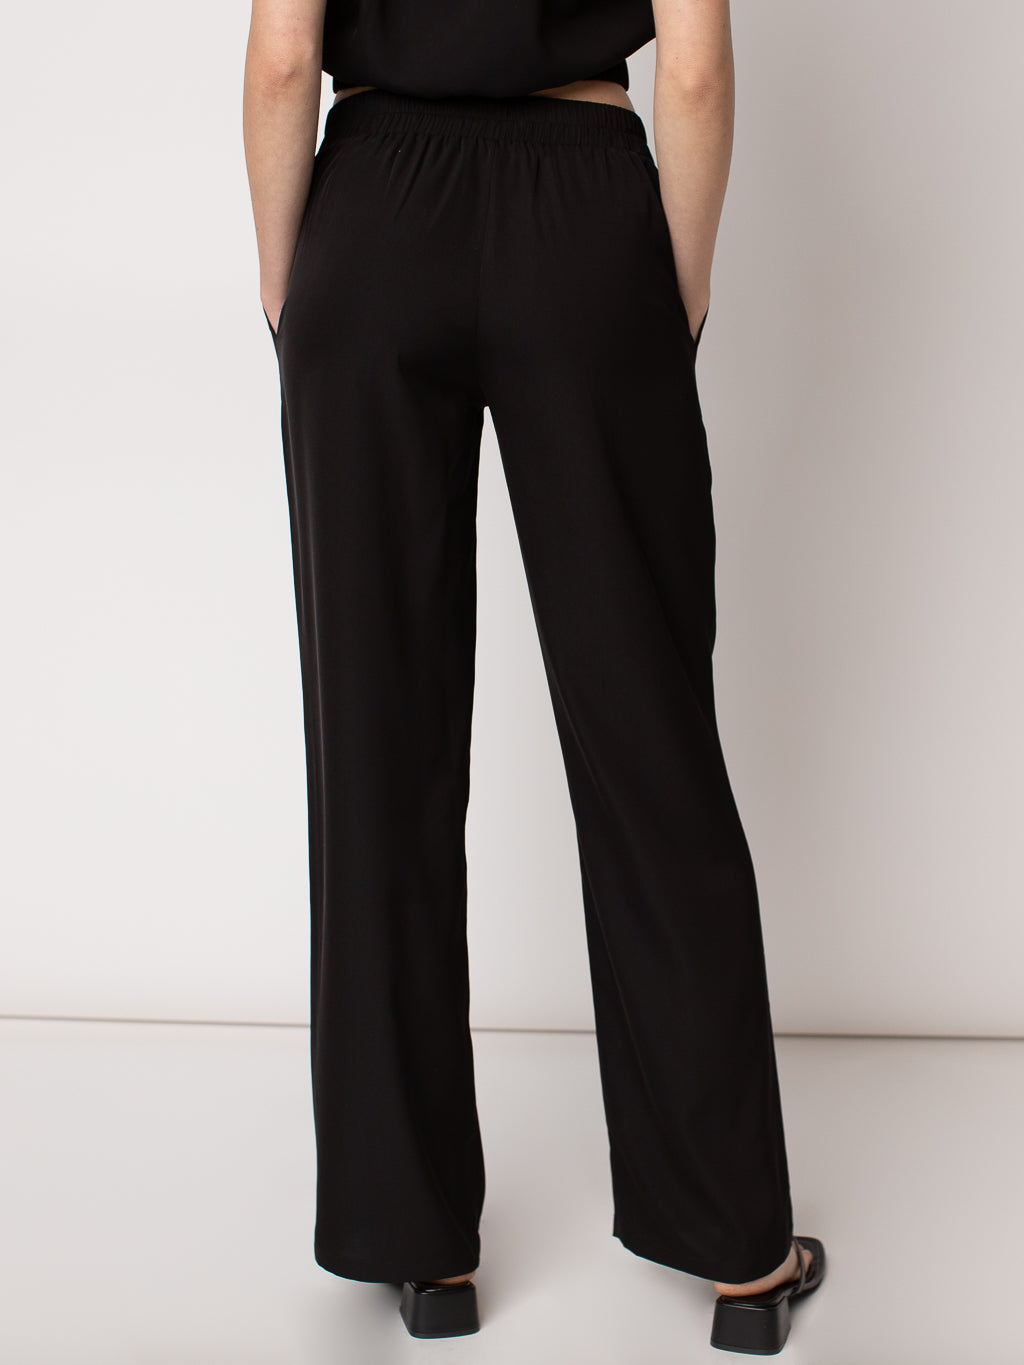 Pull-on dress pant with elastic waistband